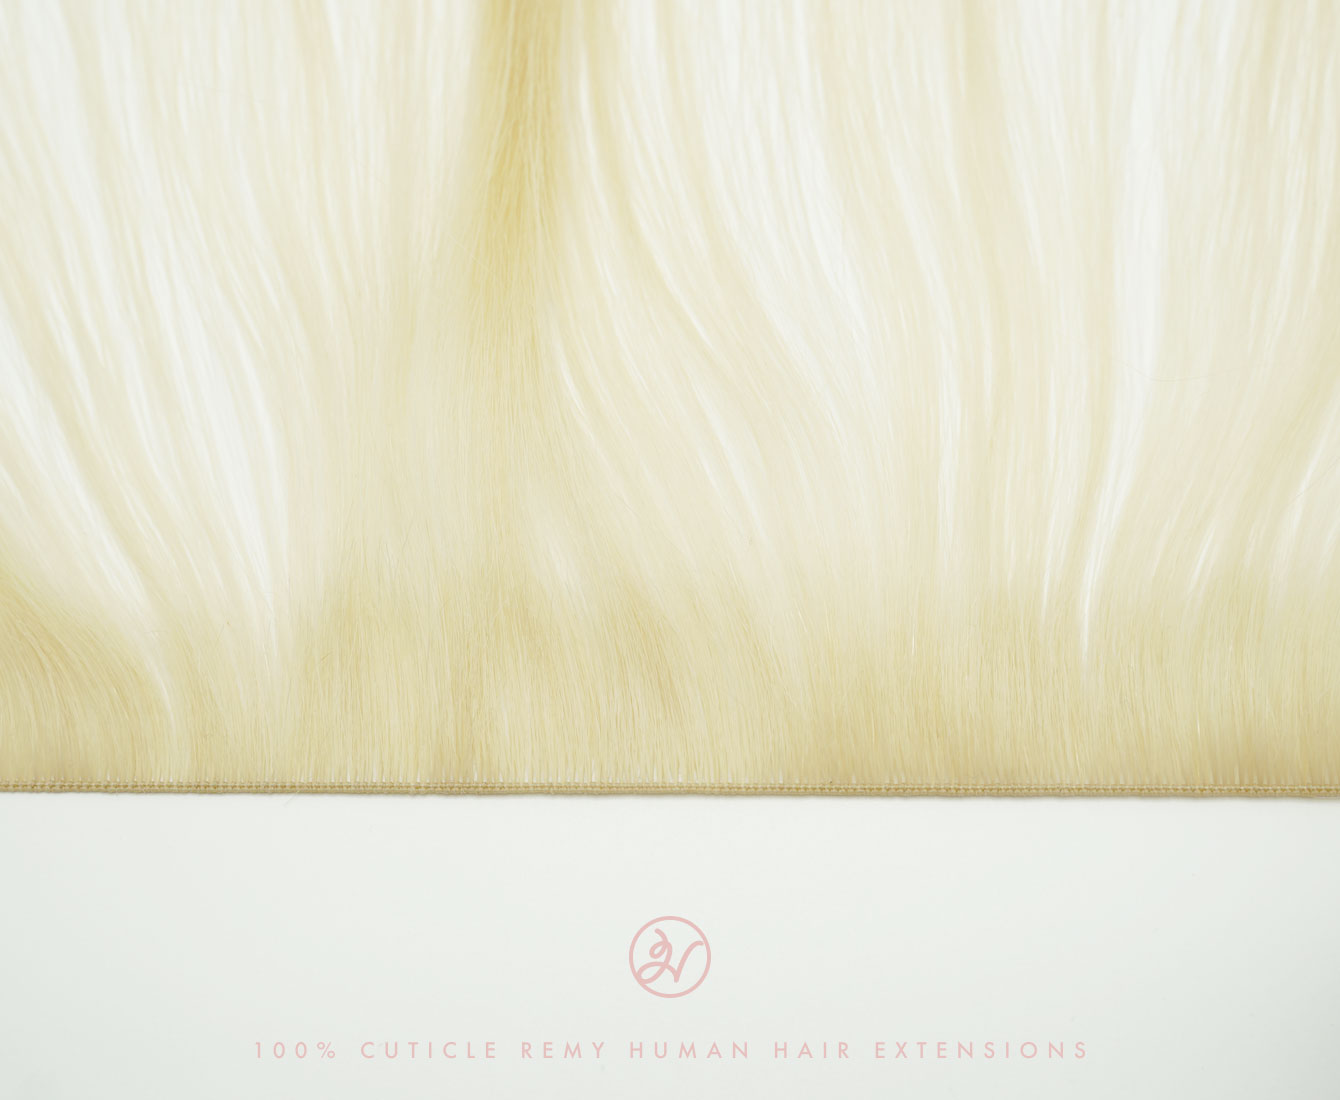 Weft of Hairlaya's Hand-Tied Hair Extensions